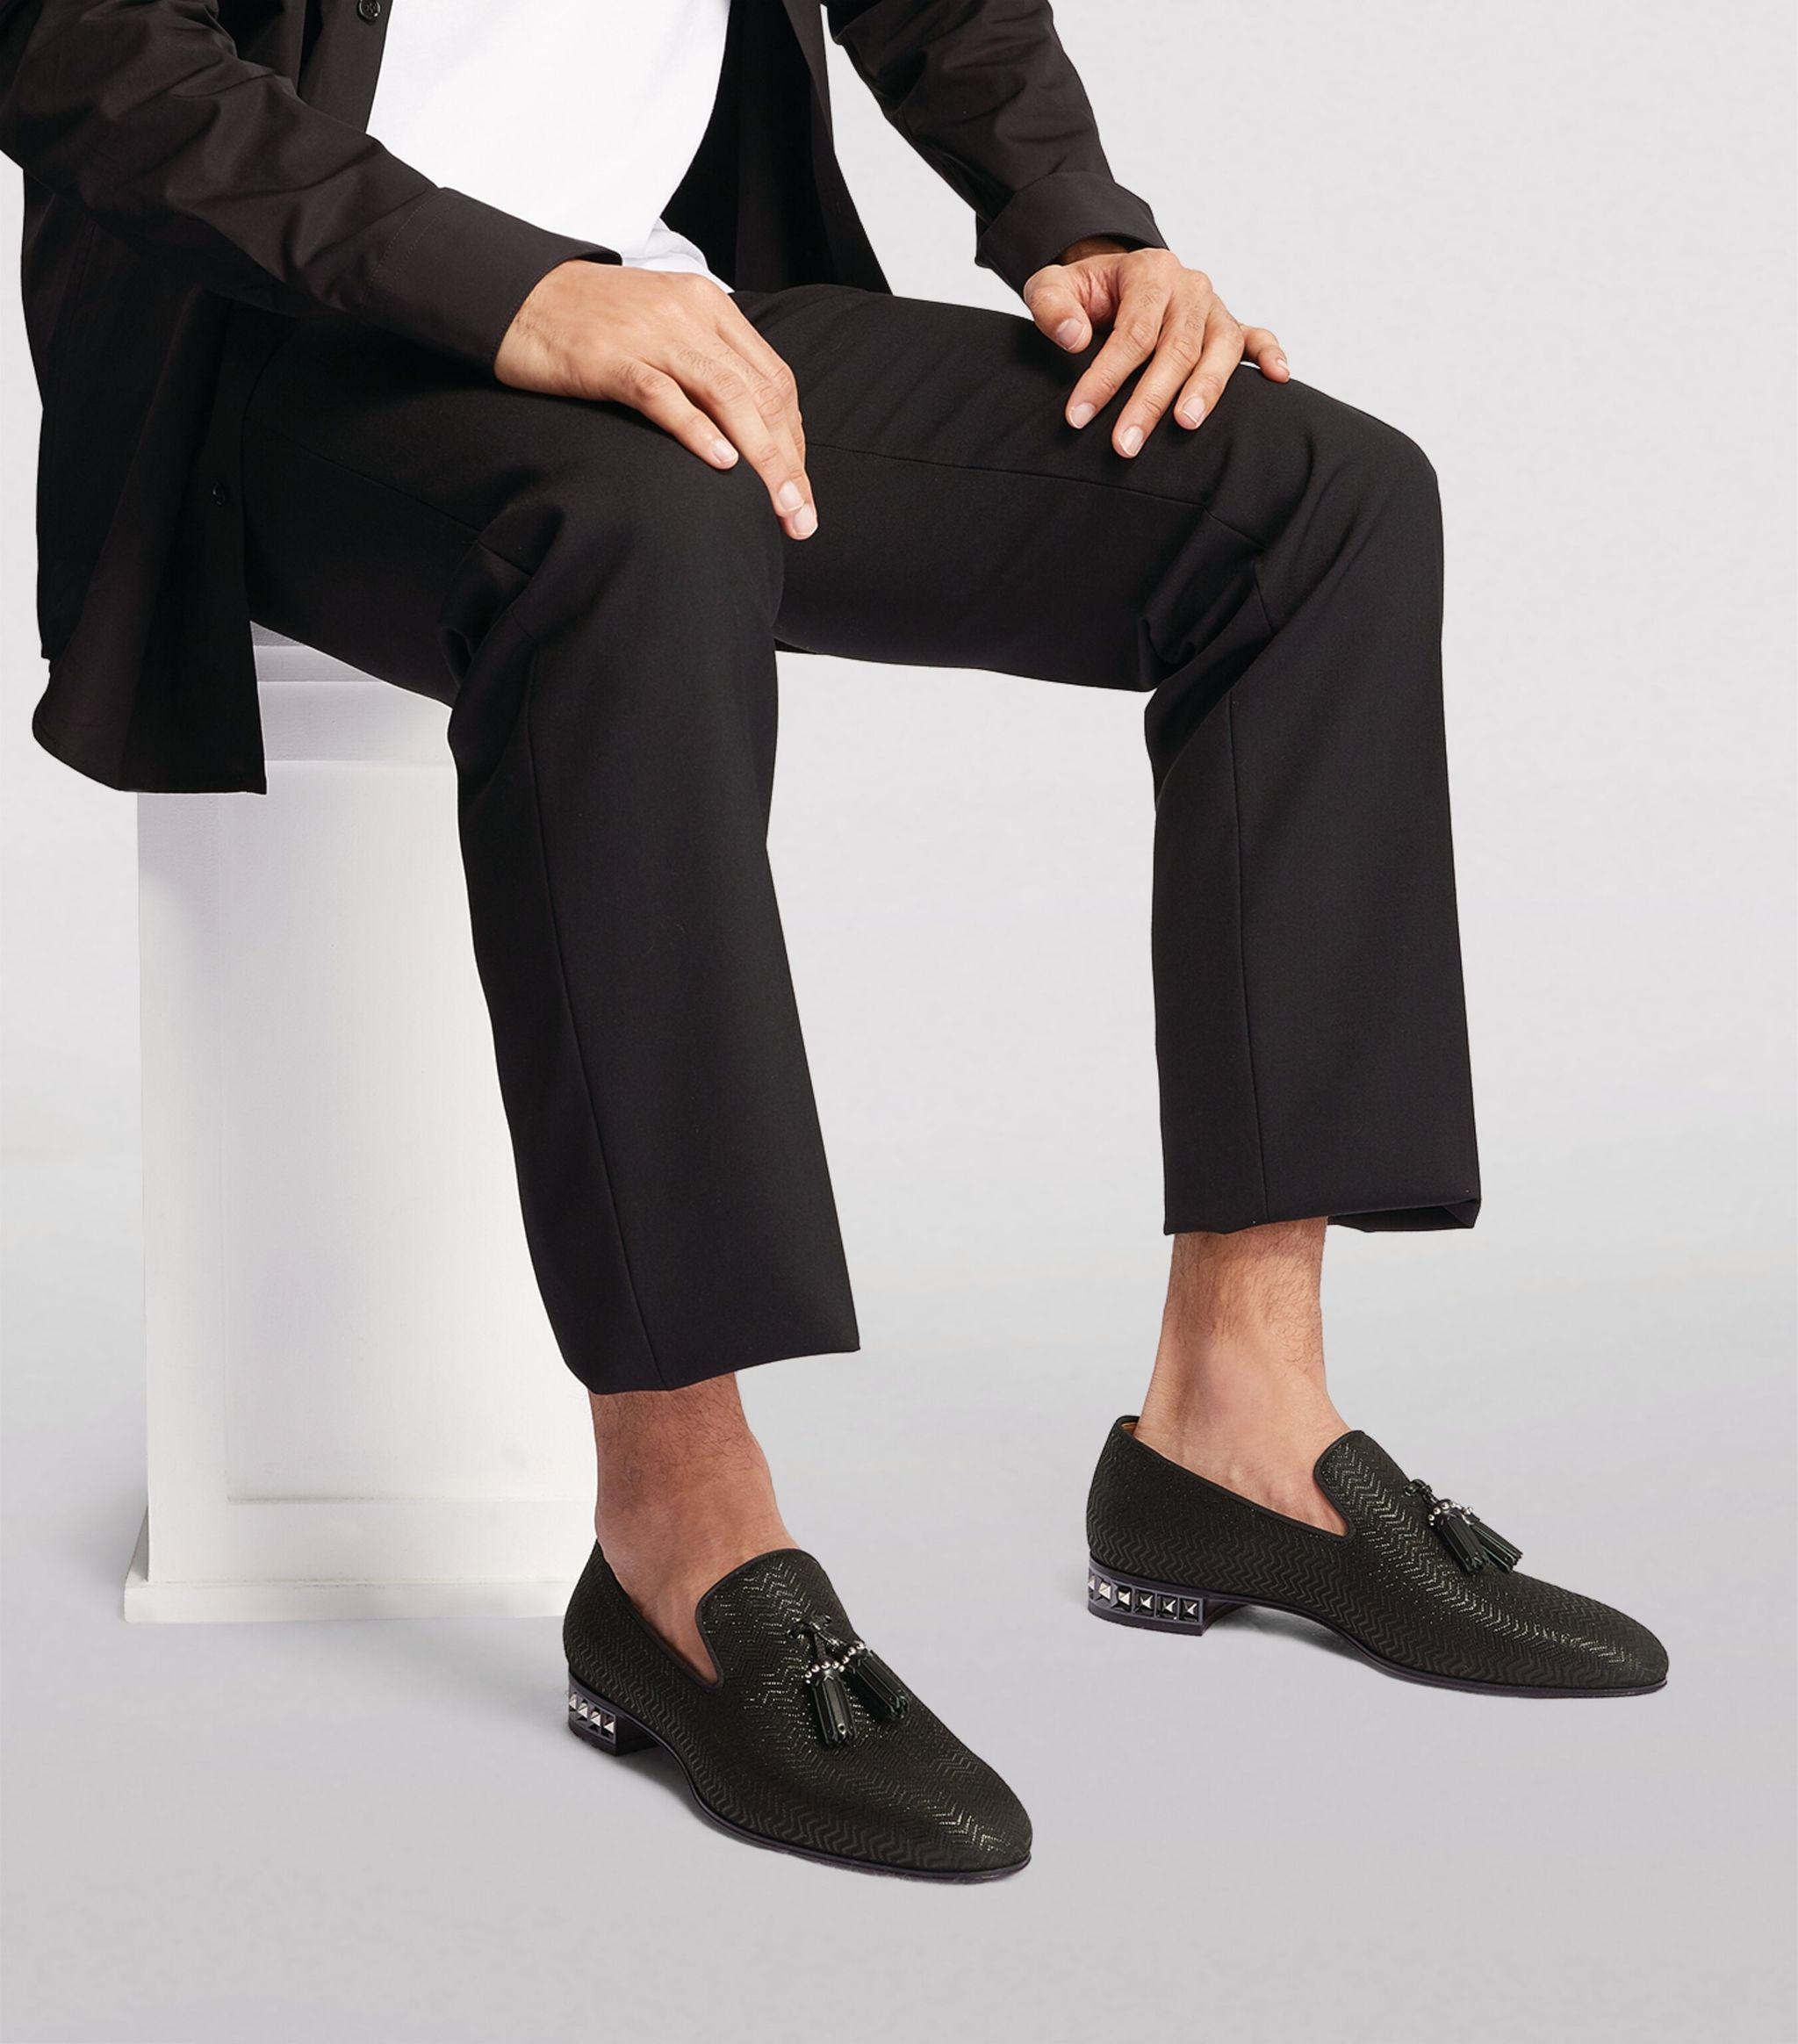 Christian Louboutin Shoes Mens Loafers